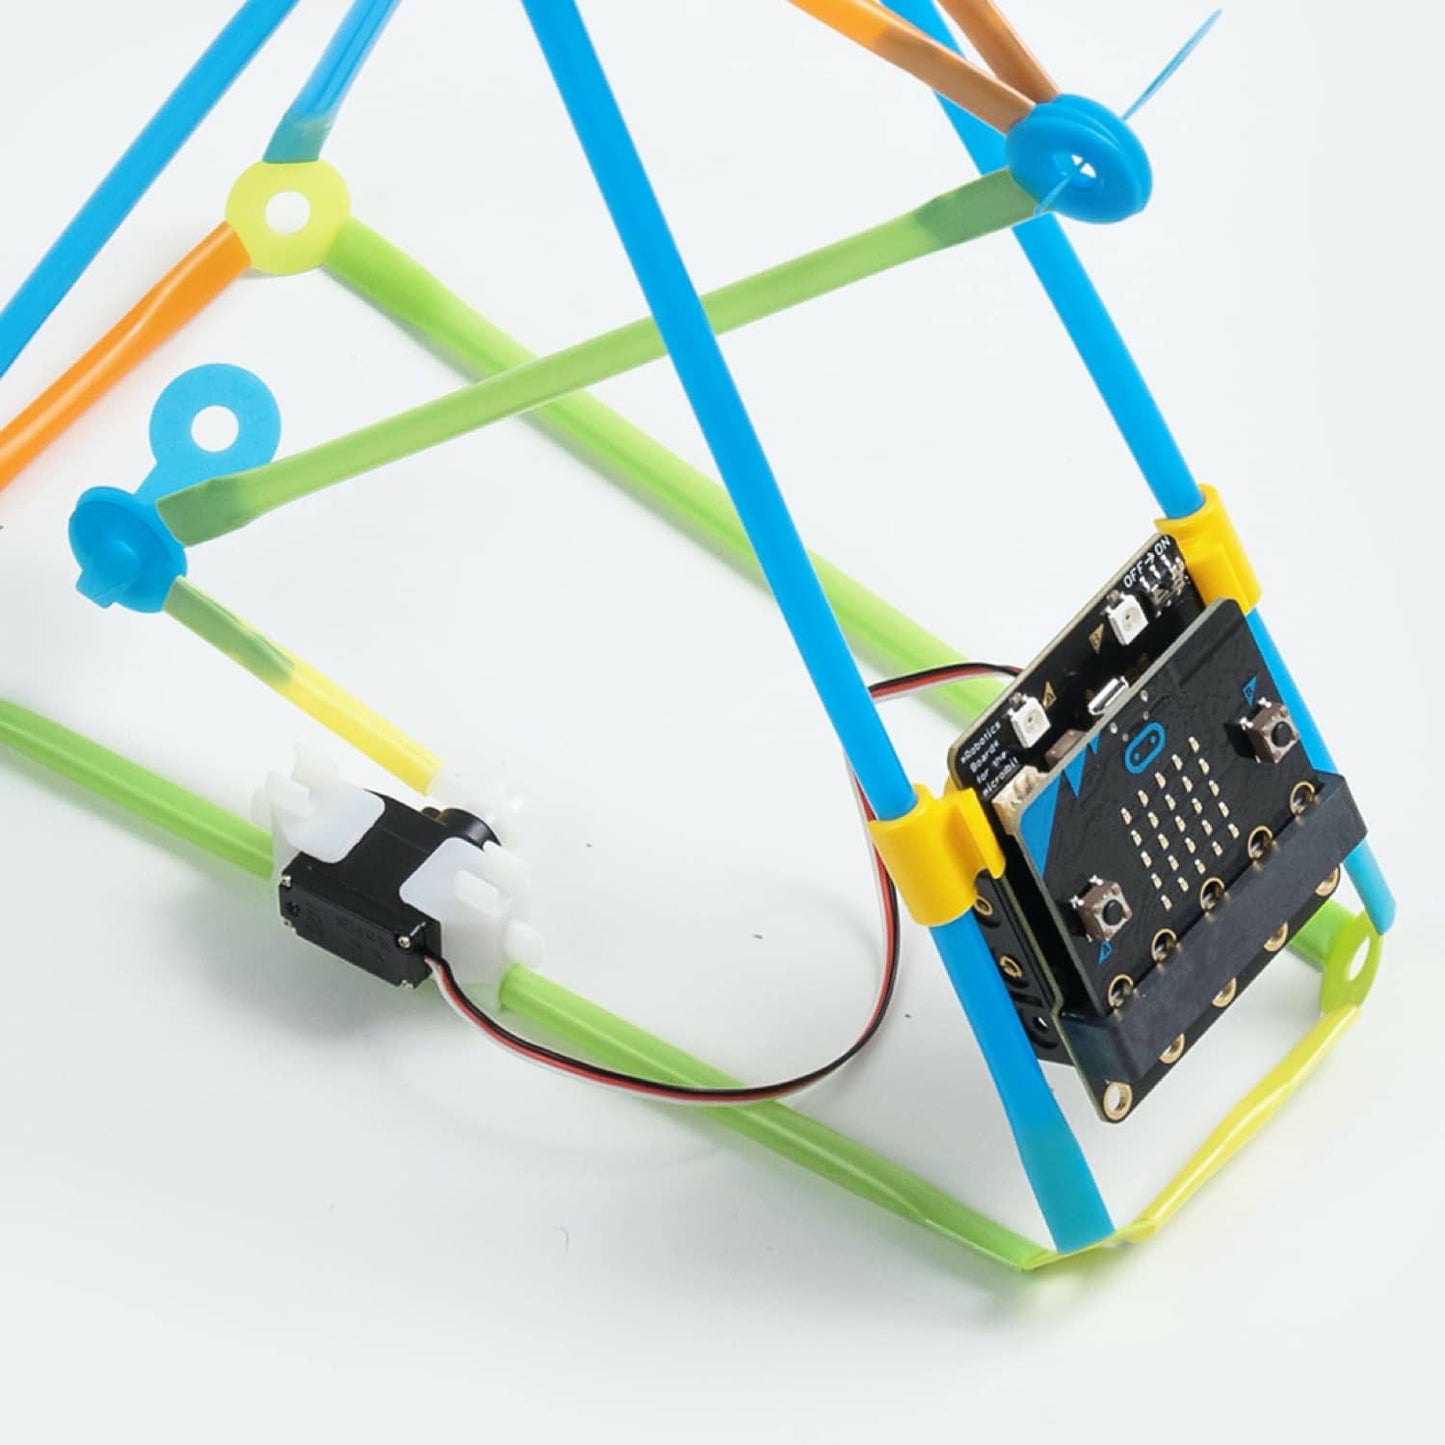 Strawbees Robotic Inventions for micro:bit - 10 Pack